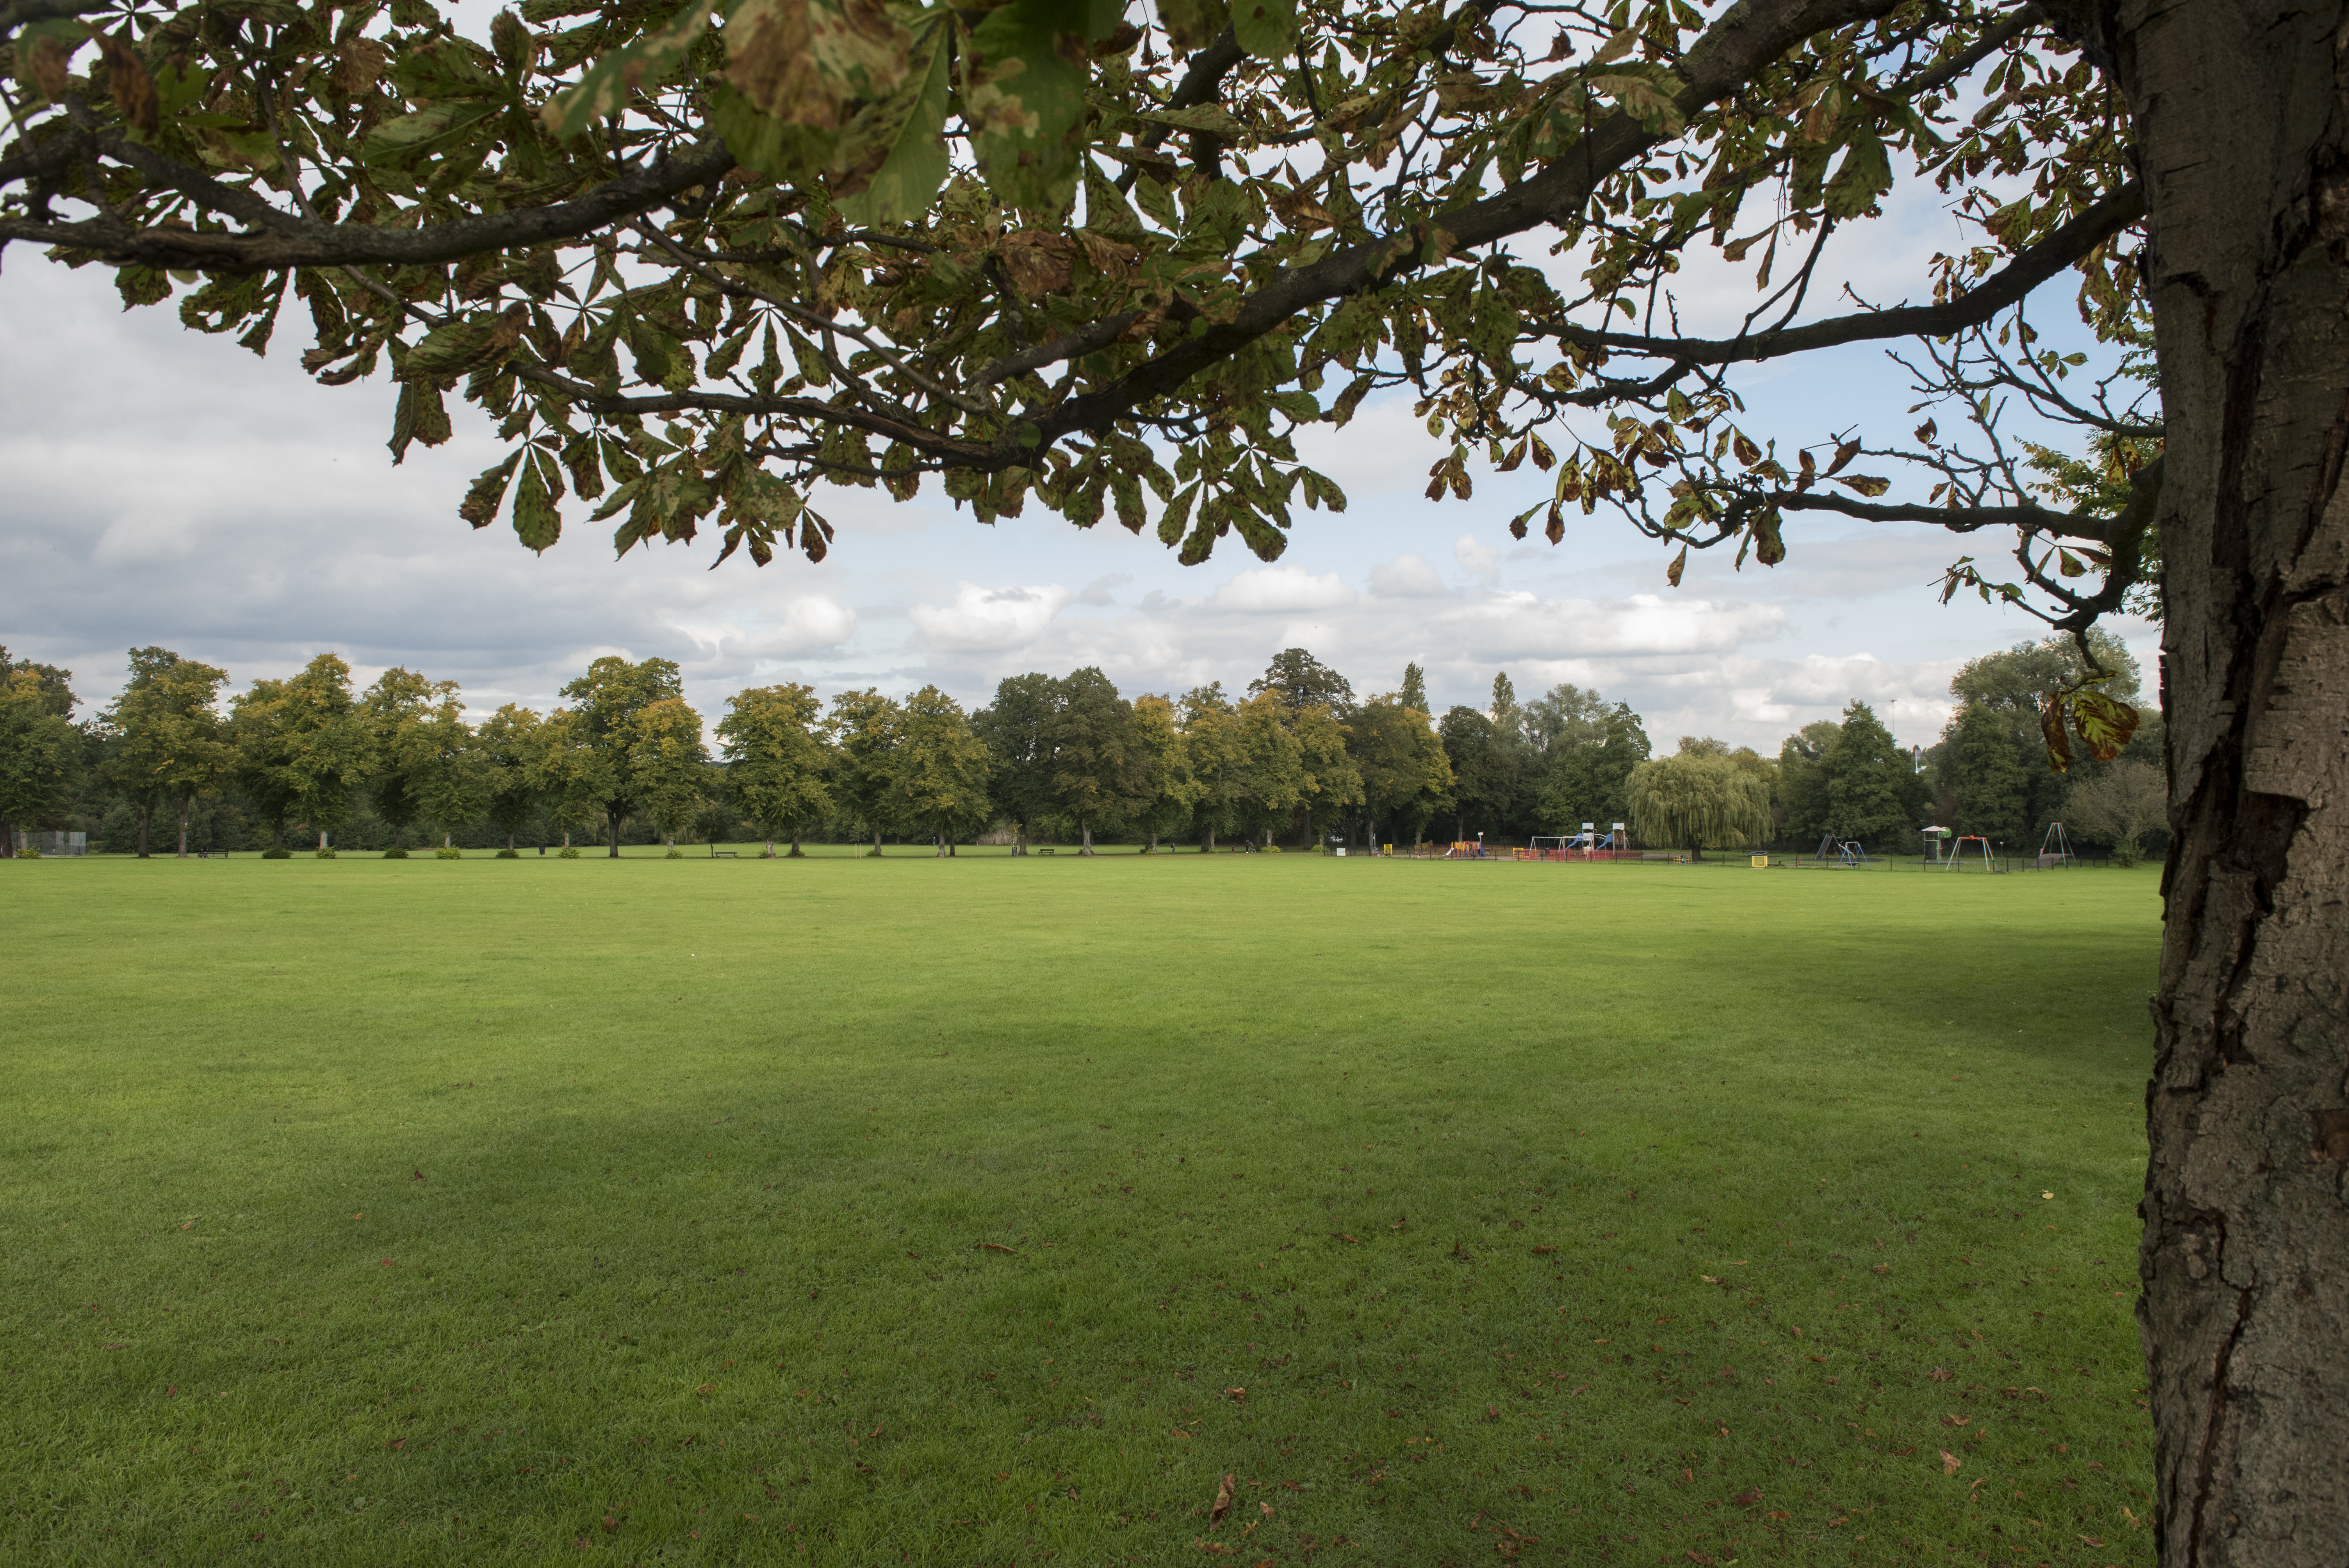 An image of Beverley Park with a big tree to the right of the image and looking out onto the park